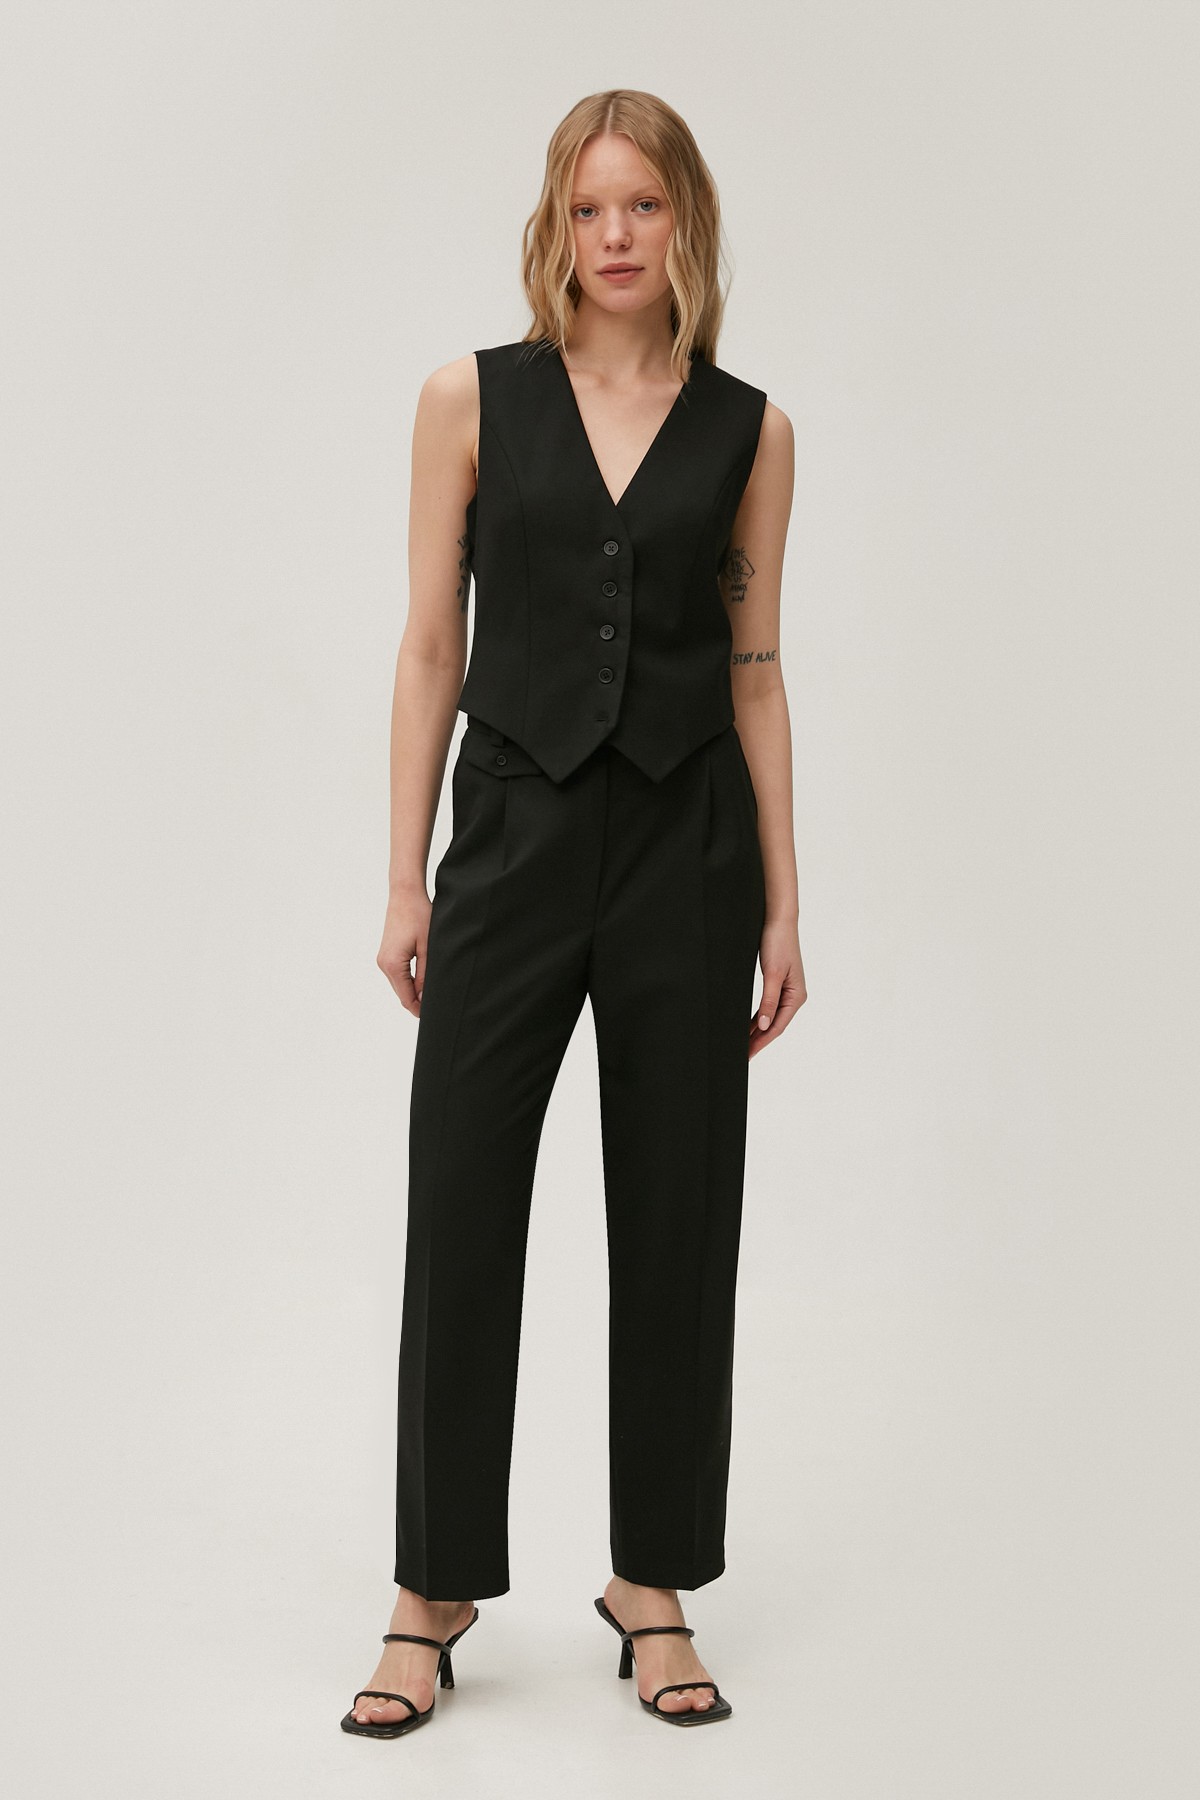 Tapered black pants made of suiting fabric with wool